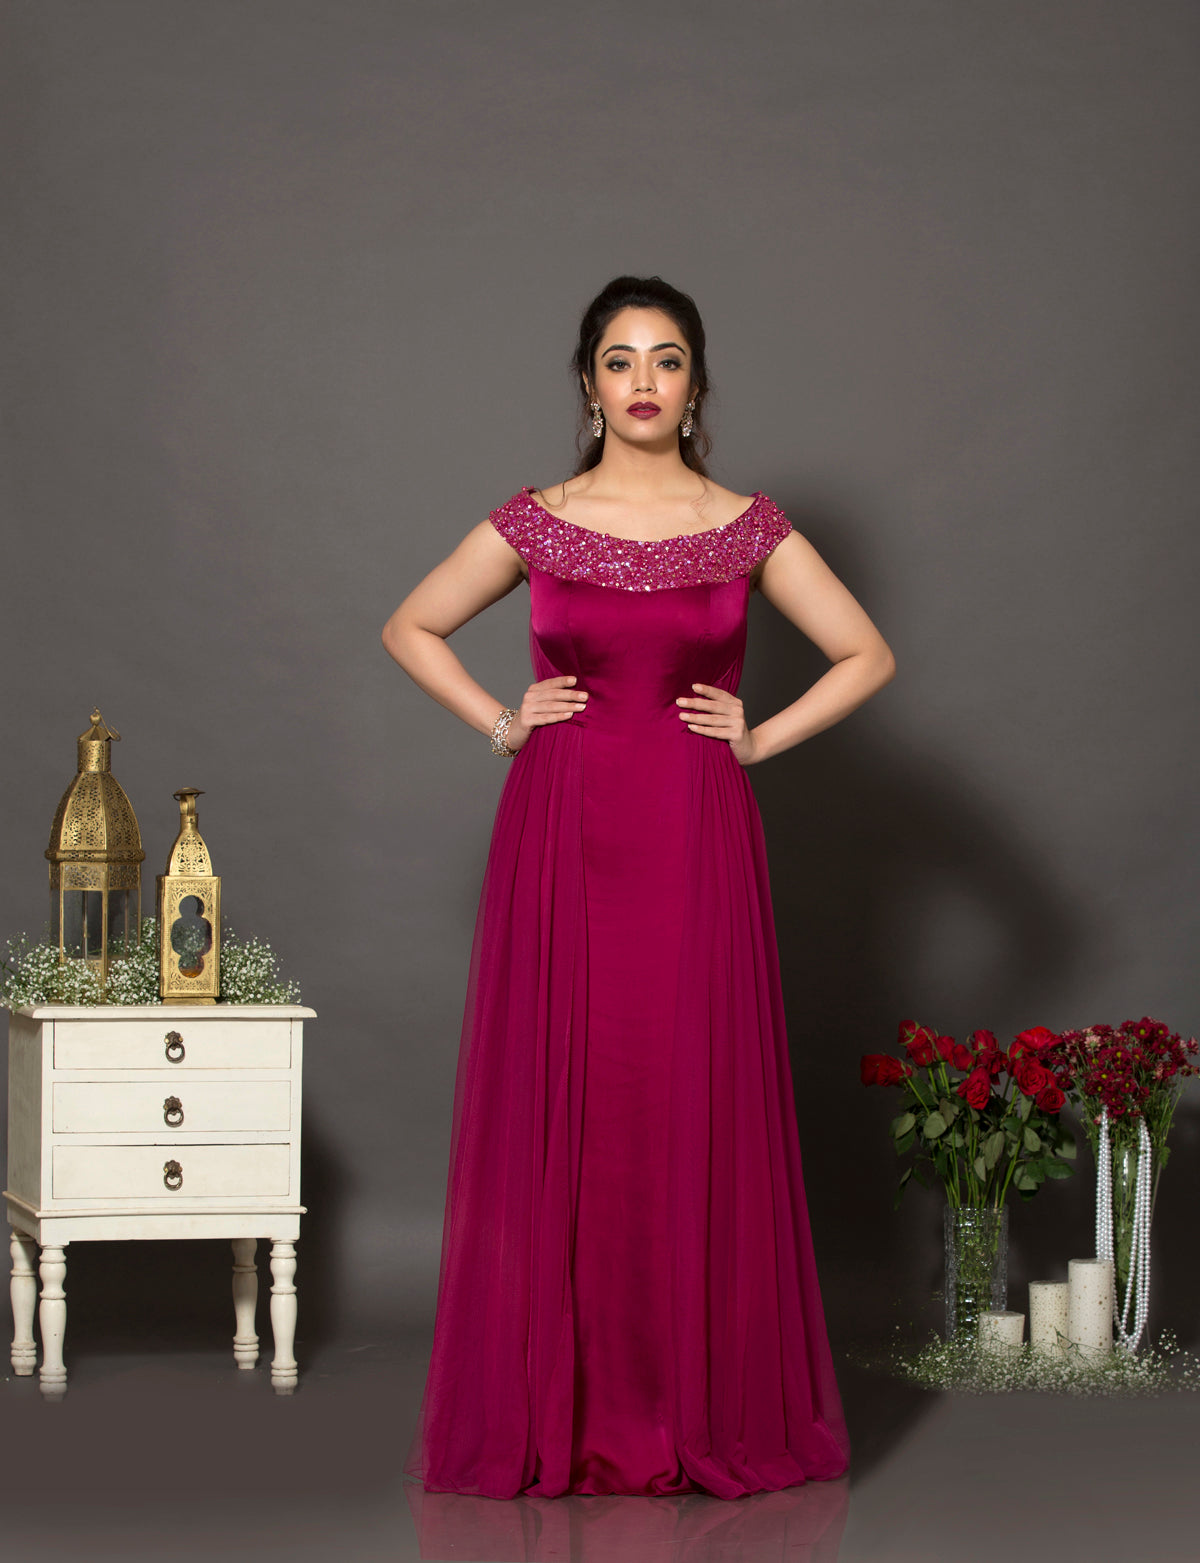 Maroon Womens Gowns - Buy Maroon Womens Gowns Online at Best Prices In  India | Flipkart.com